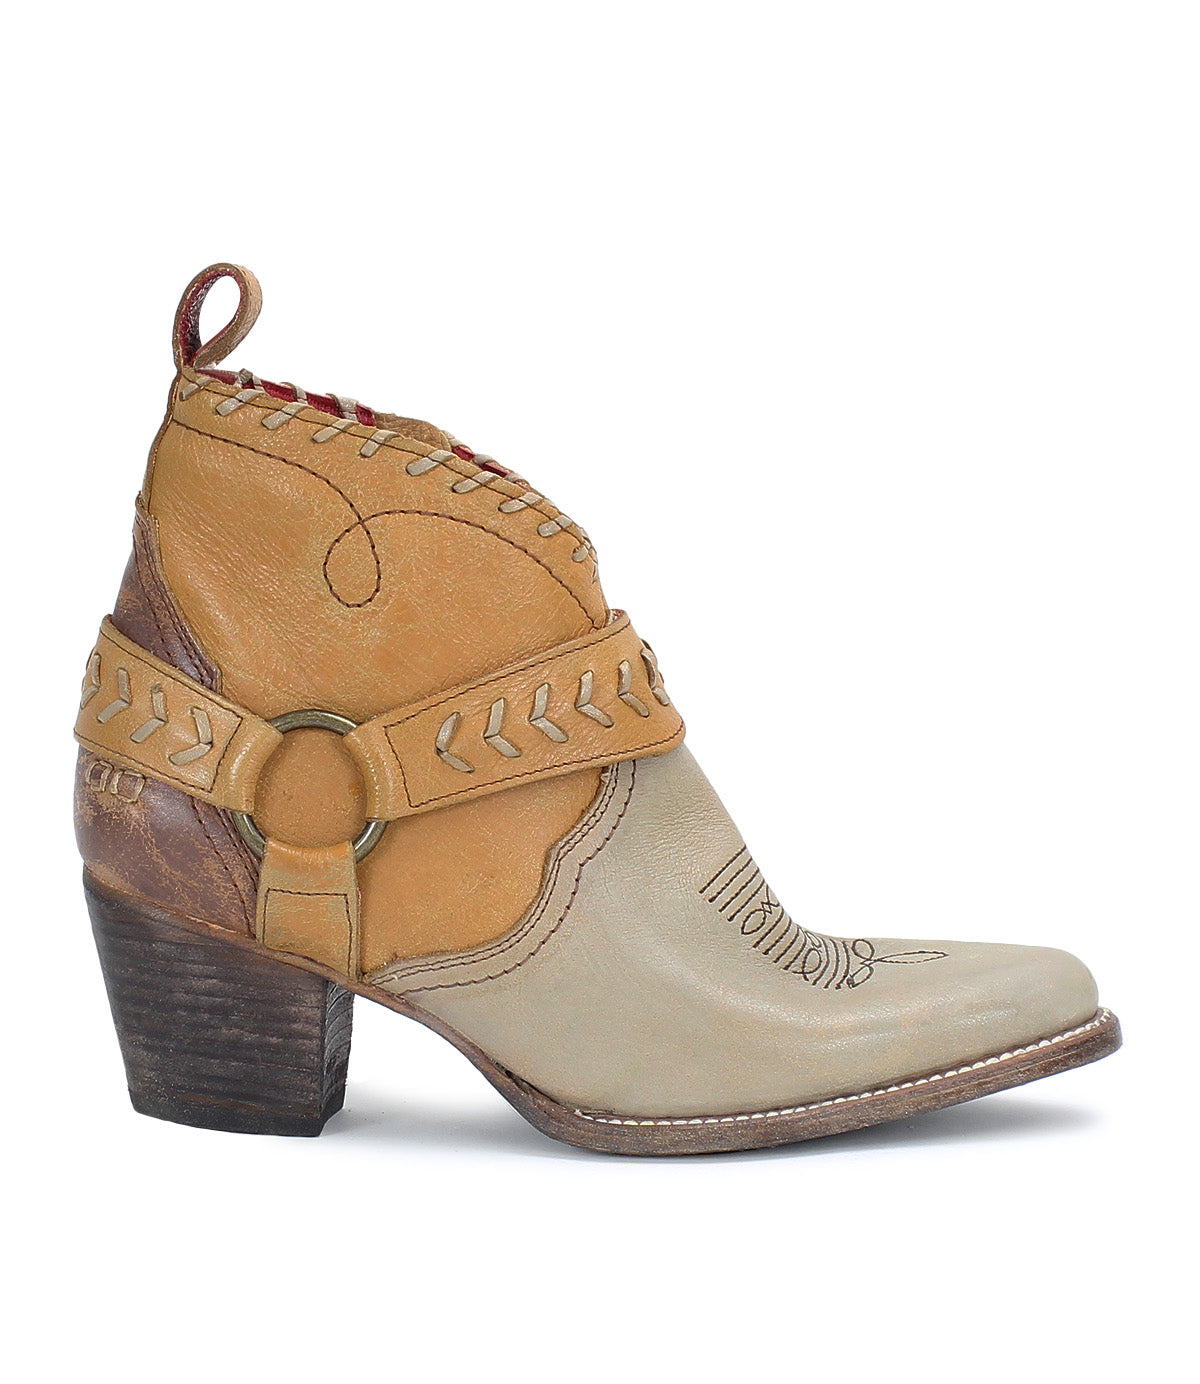 A Tania ankle boot in tan and tan by Bed Stu.